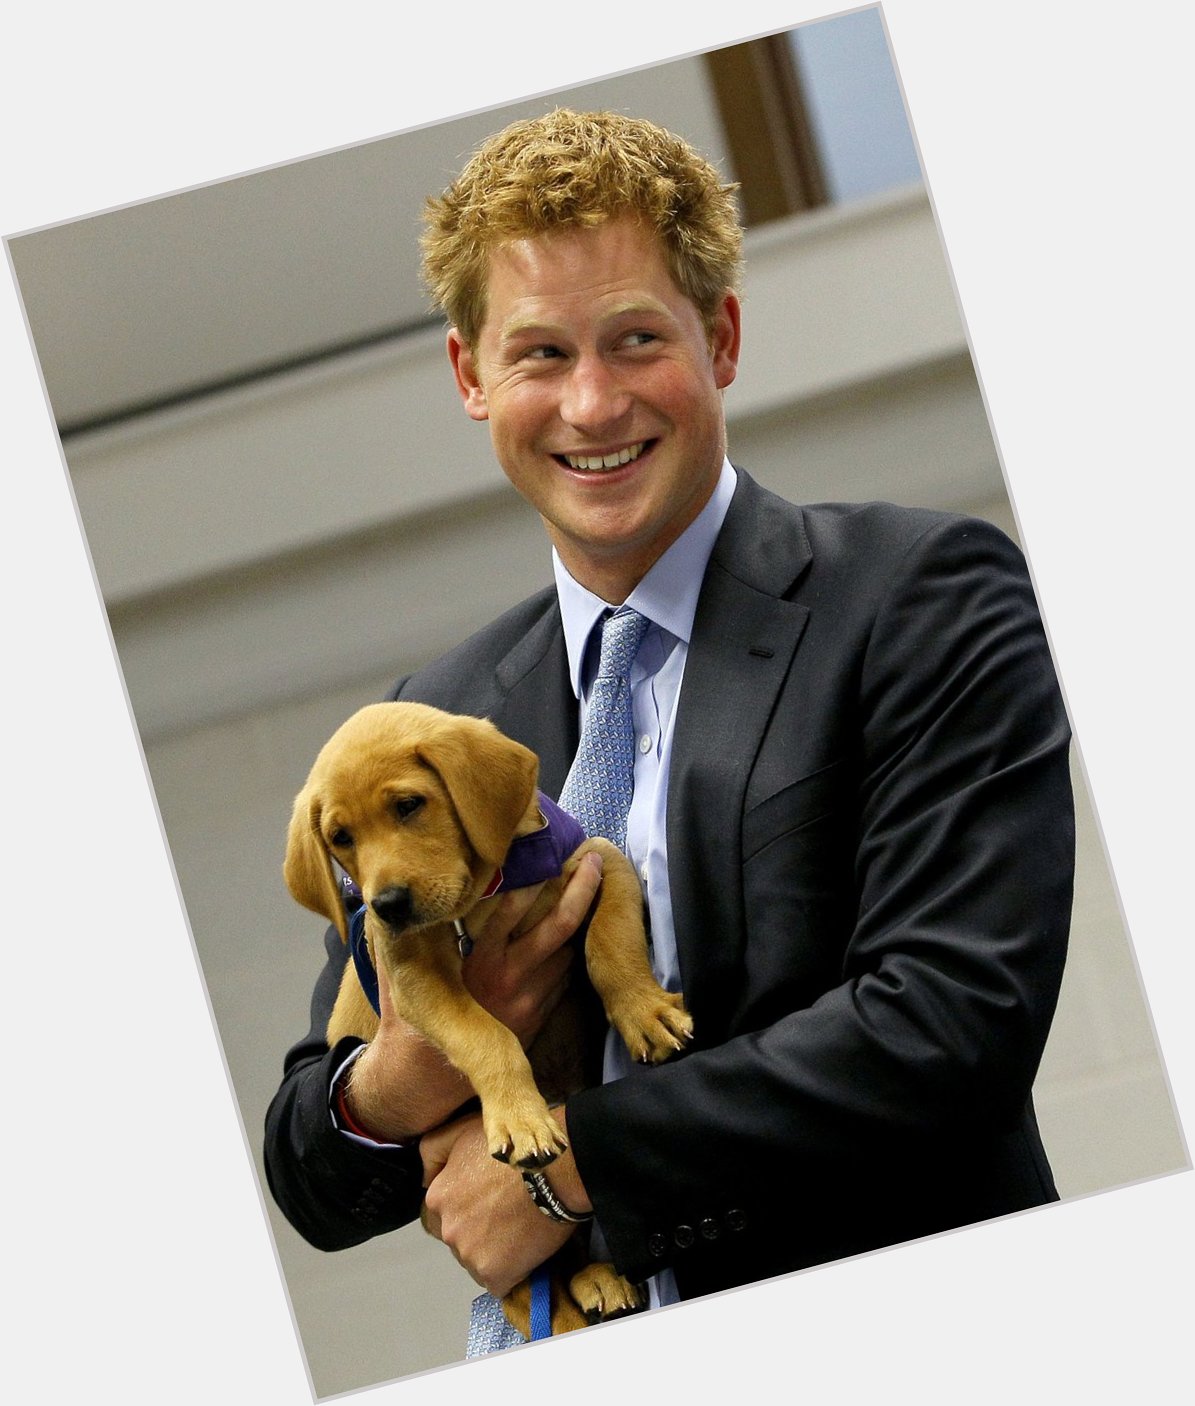 Happy Birthday Prince Harry! This picture is proof that you re only getting better with age    